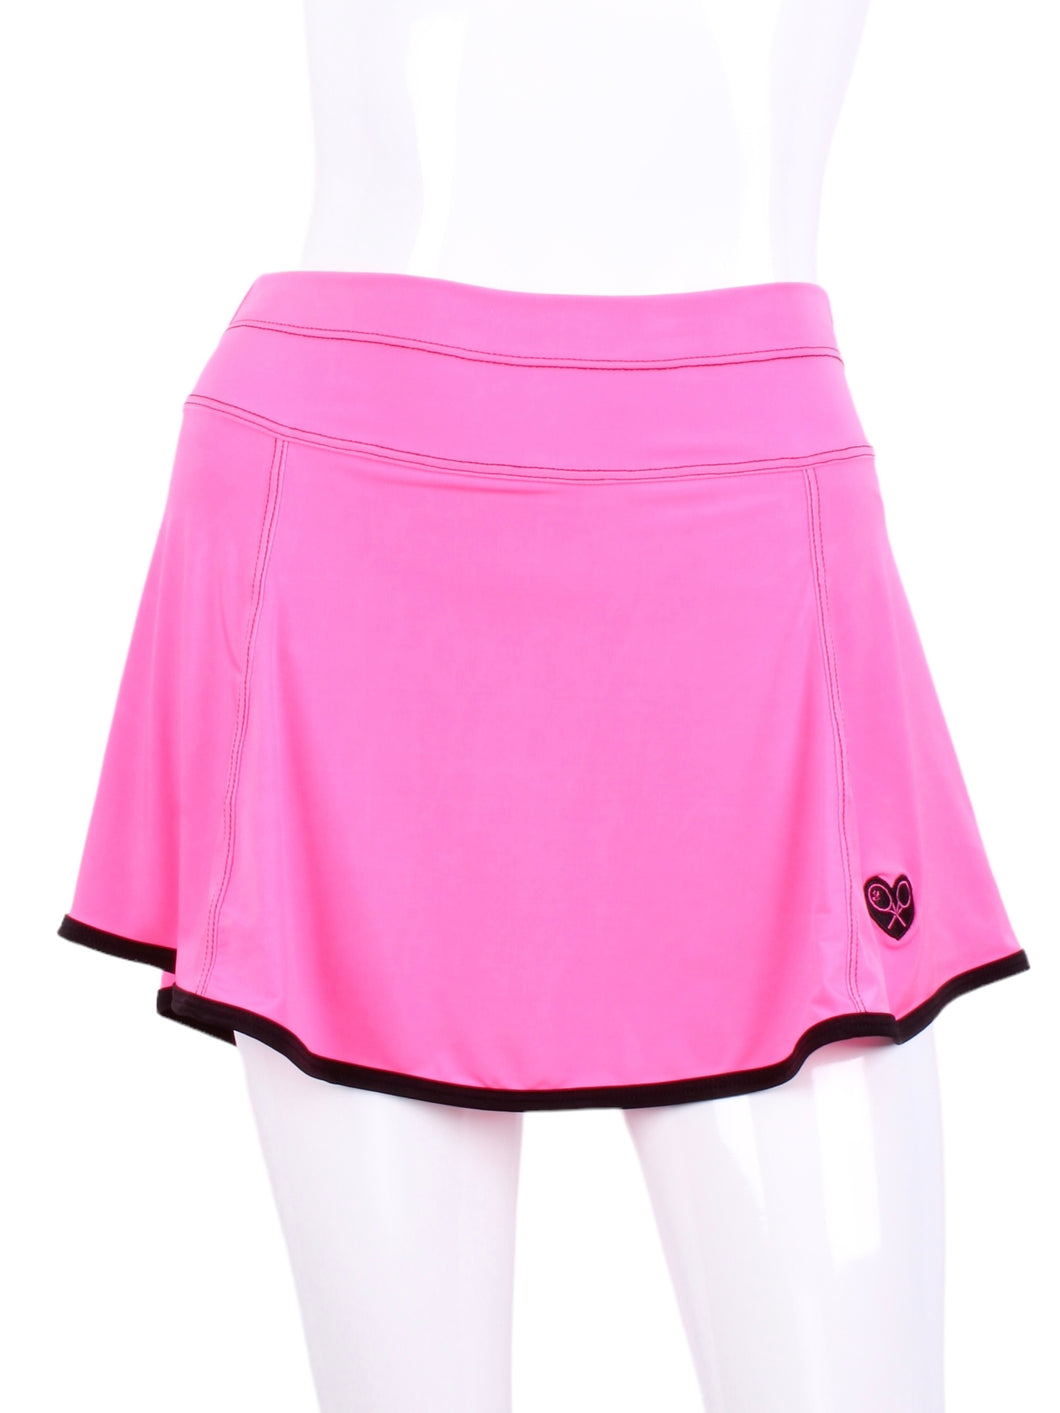 Gladiator Skirt Pink - I LOVE MY DOUBLES PARTNER!!! This is our limited edition Gladiator Skirt Pink.  This piece has a silky soft and quick-drying matching shorties, and binding to match.  We make these in very small quantities - by design.  Unique.  Luxurious.  Comfortable.  Cool.  Fun.